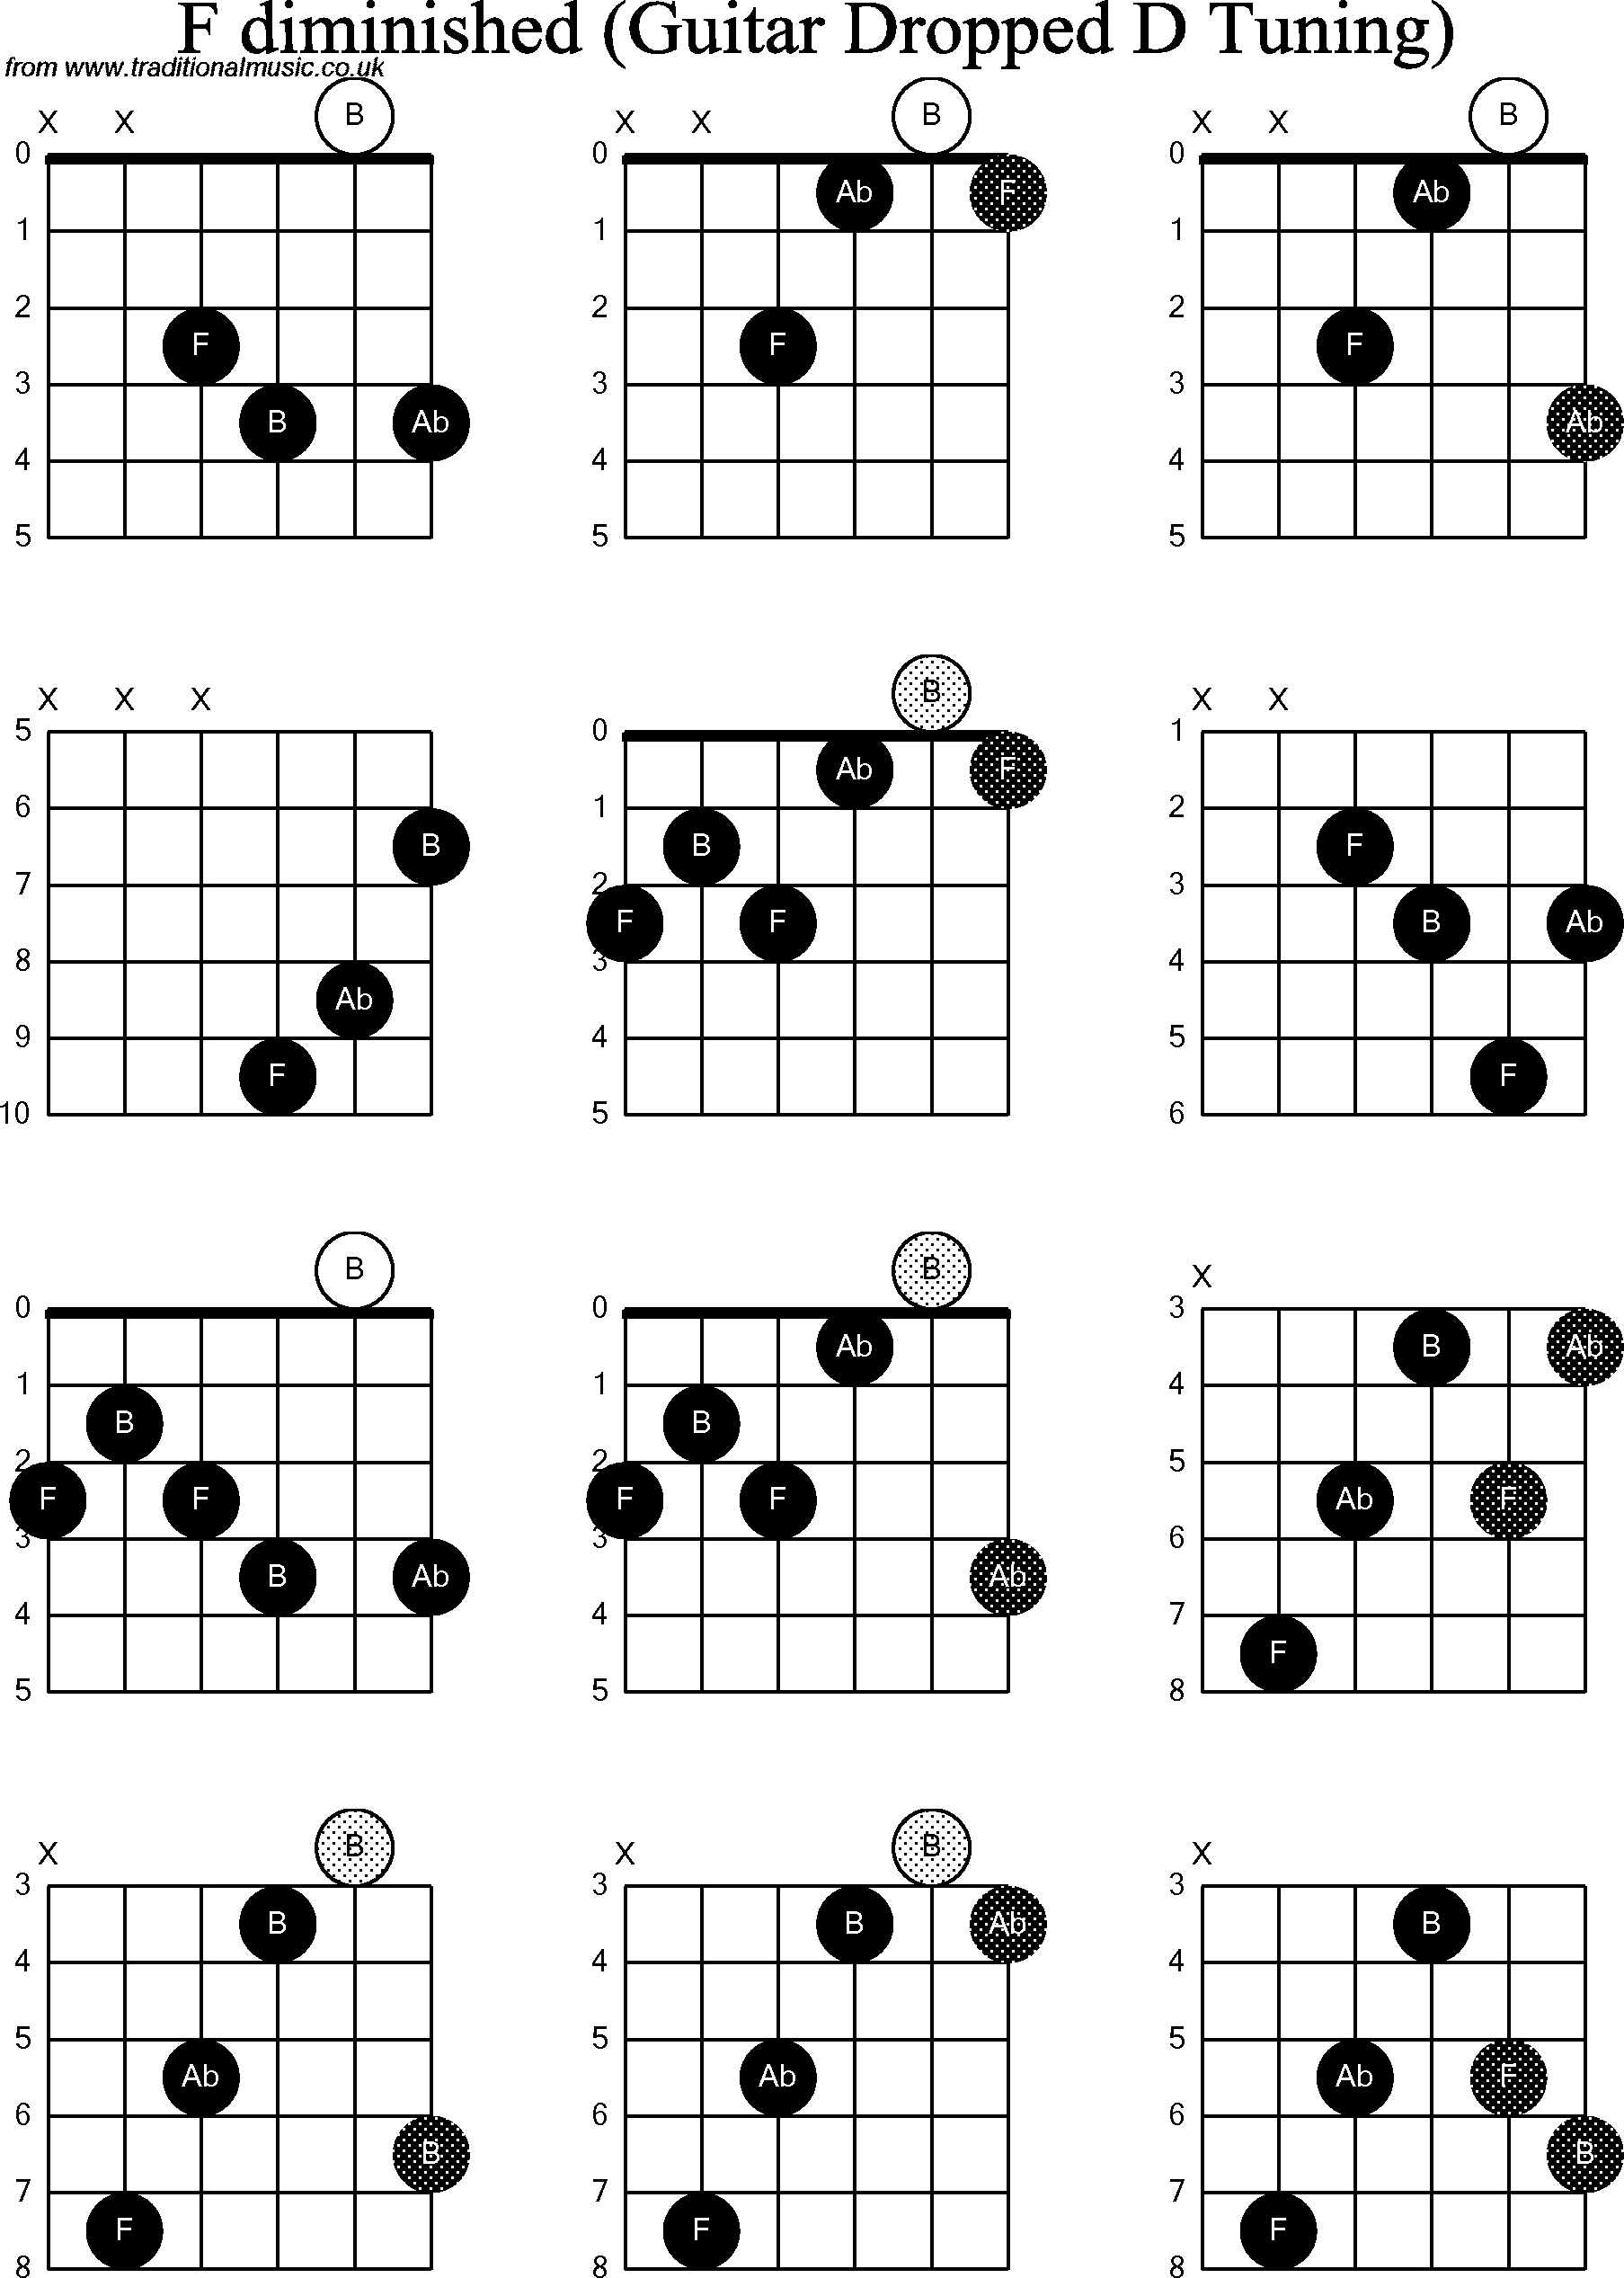 Chord diagrams for dropped D Guitar(DADGBE), F Diminished